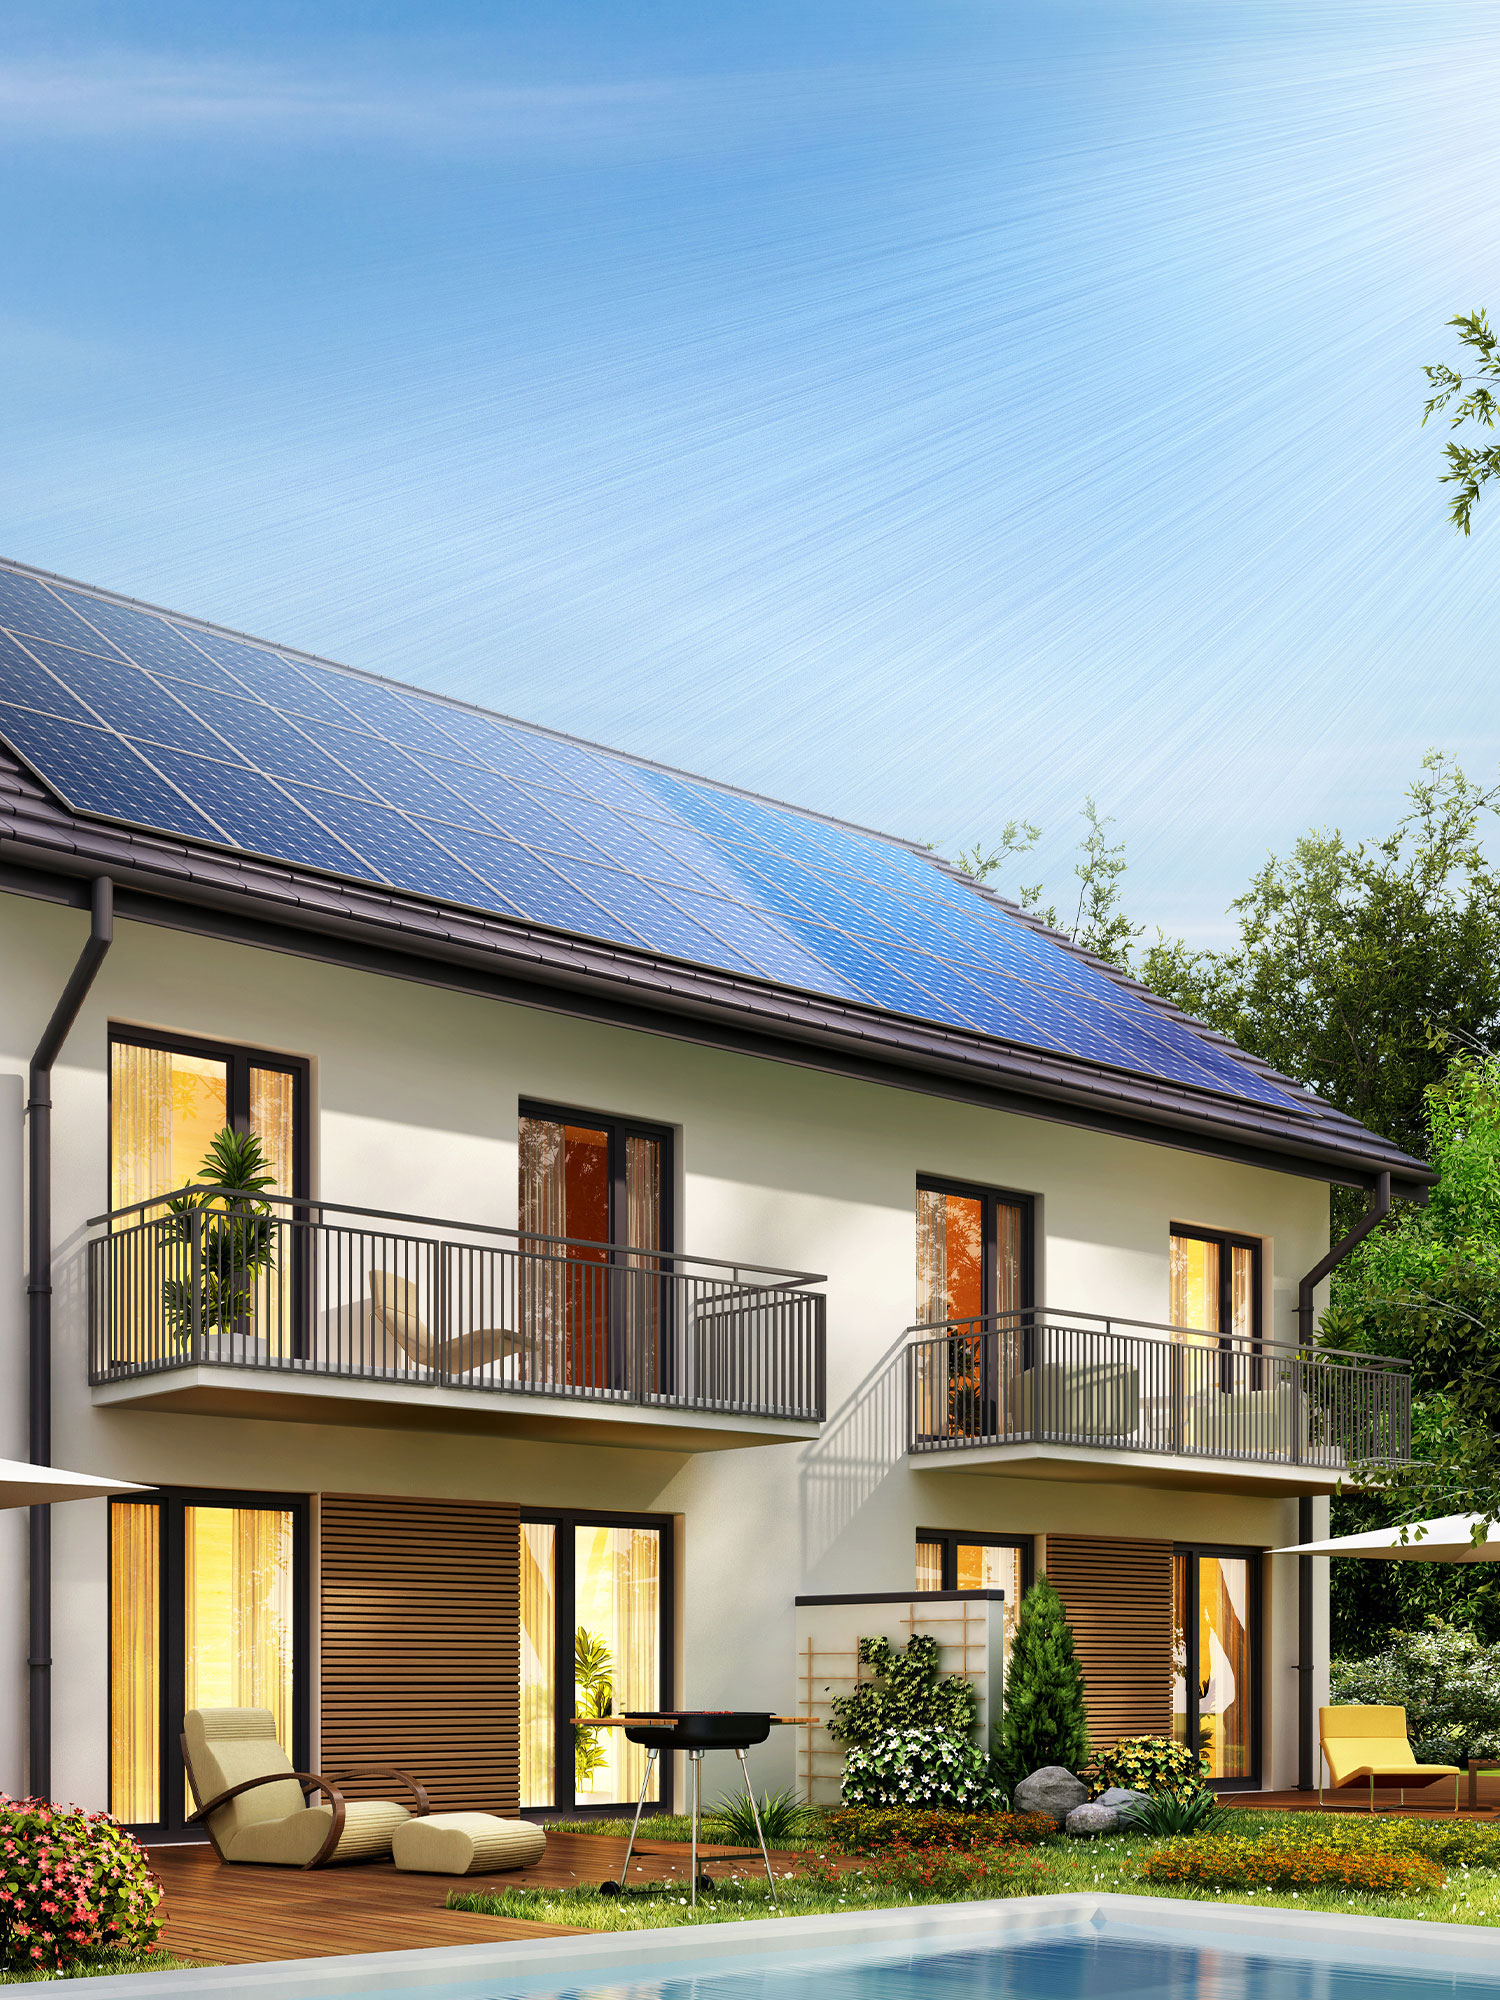 Energy independence for home in Ephraim is easy with SunPower by Custom Energy.